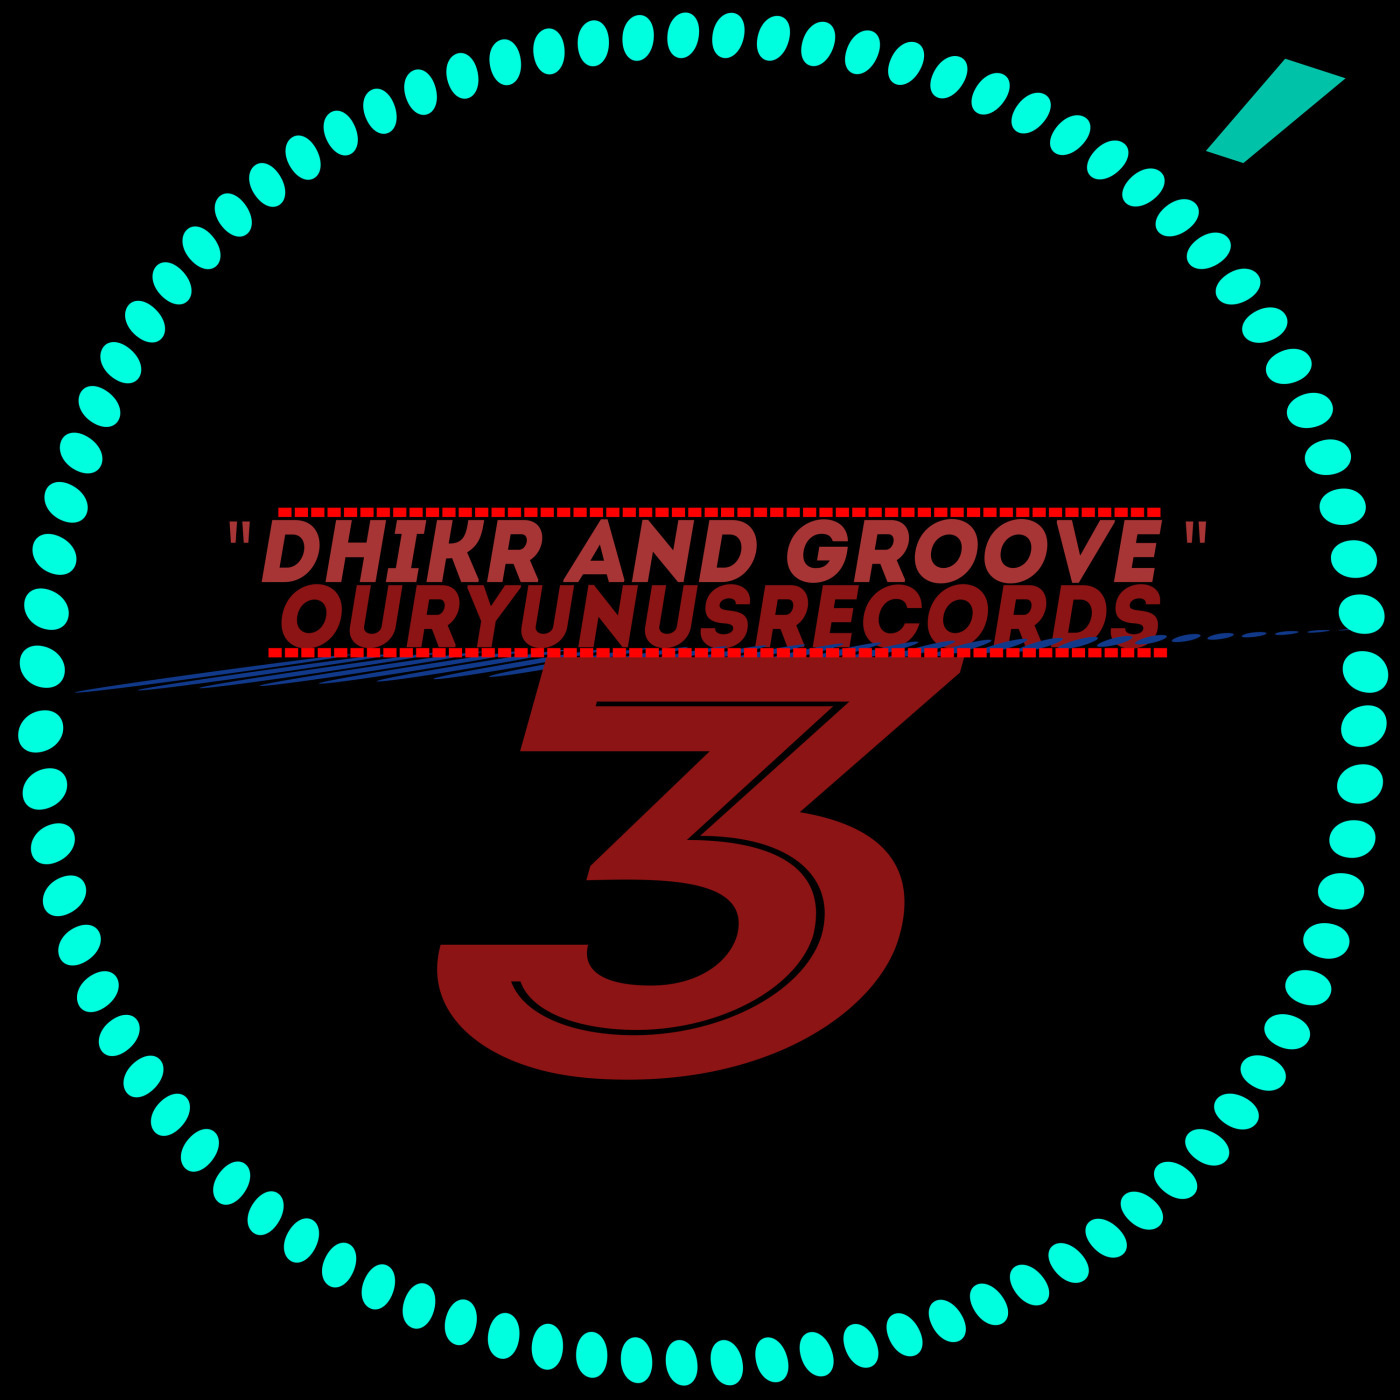 Jonasclean - Dhikr and Groove 3 / Our Yunus Records